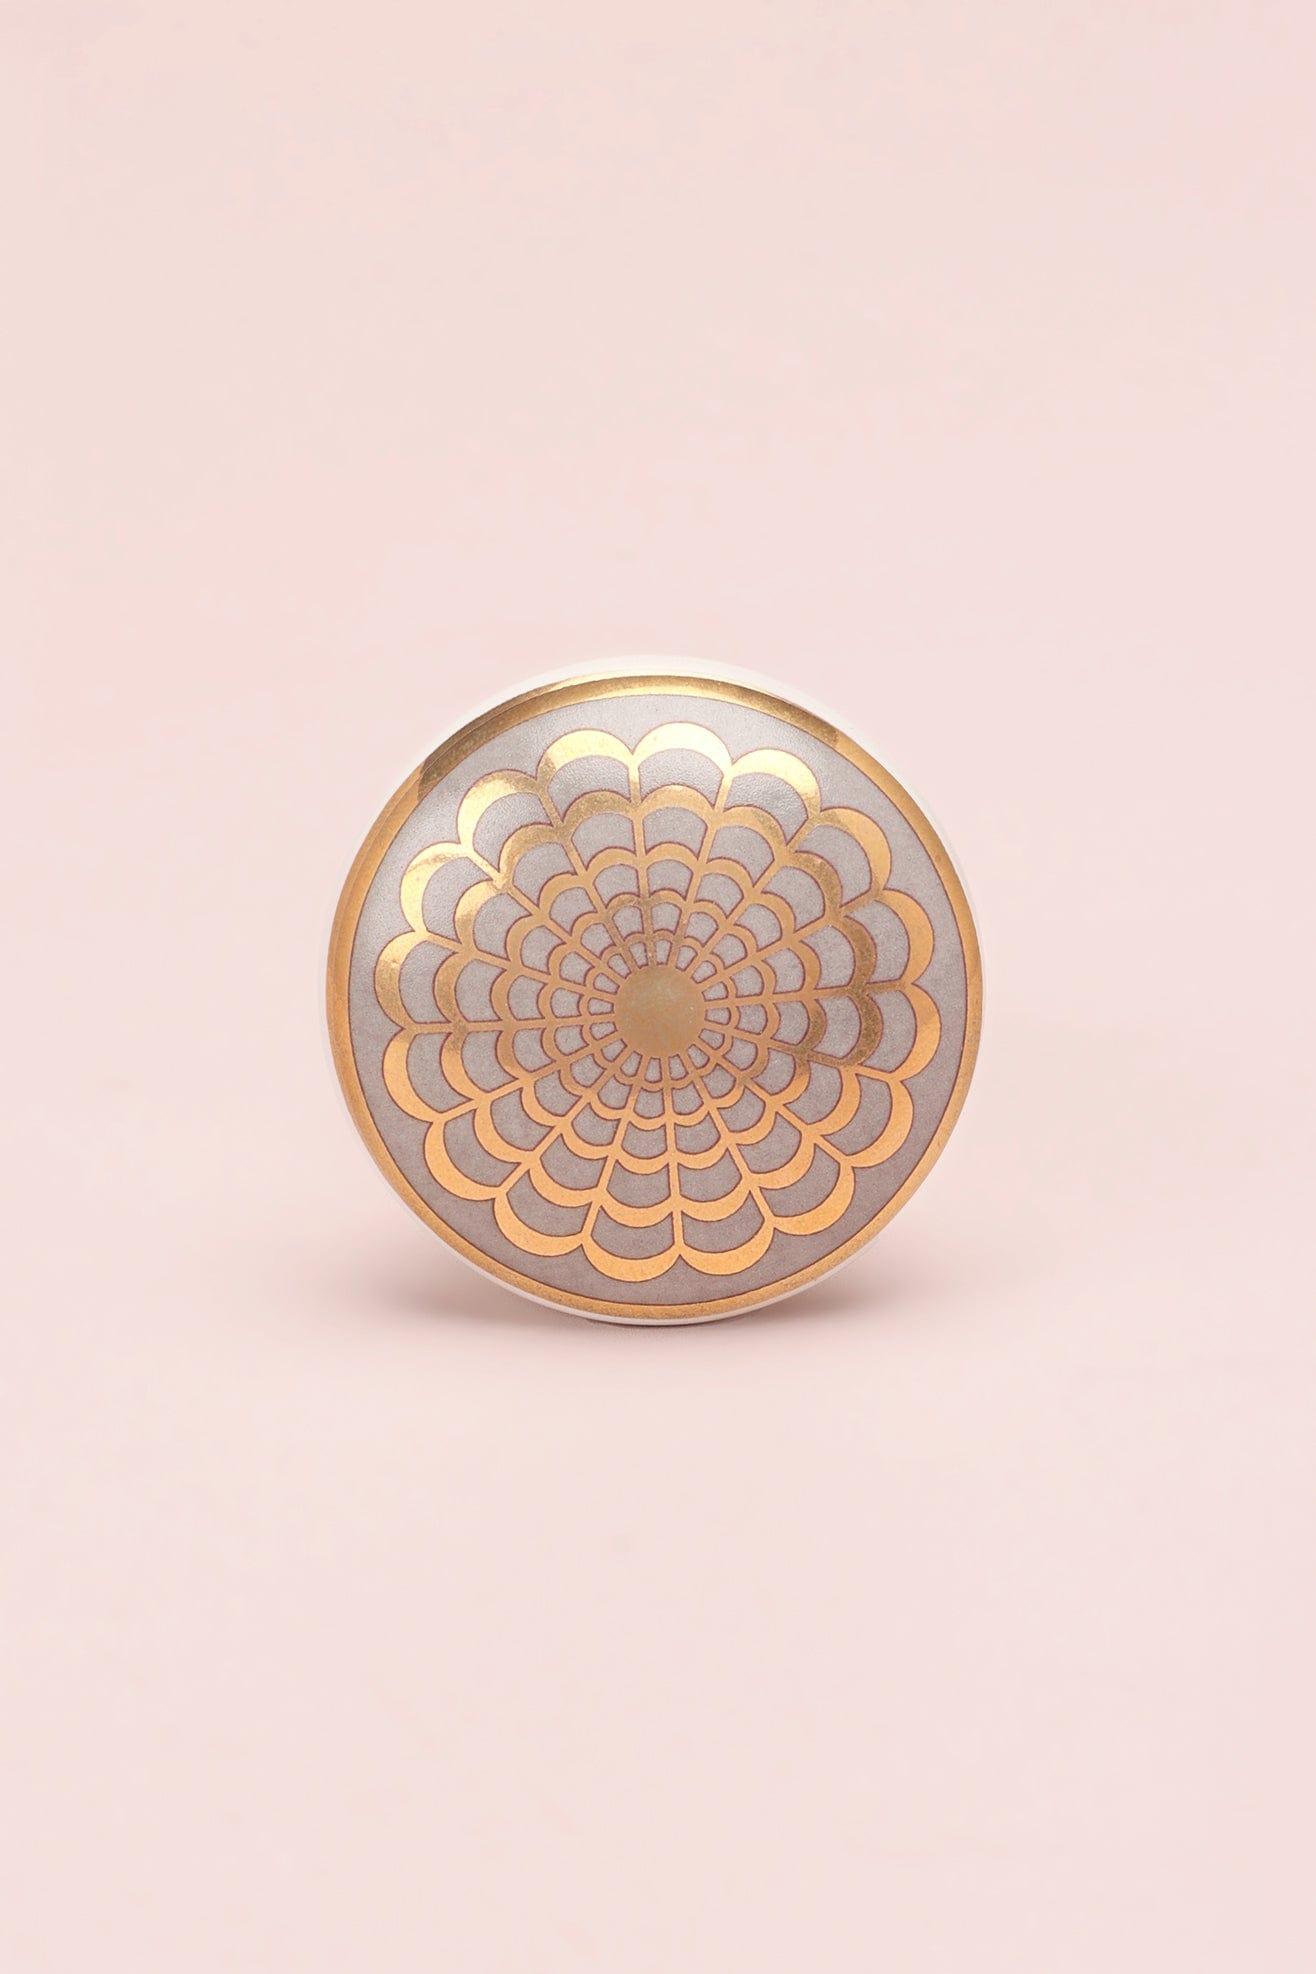 G Decor Cabinet Knobs & Handles Flower / Gold Geometry Patterned Ceramic Round Door Knobs